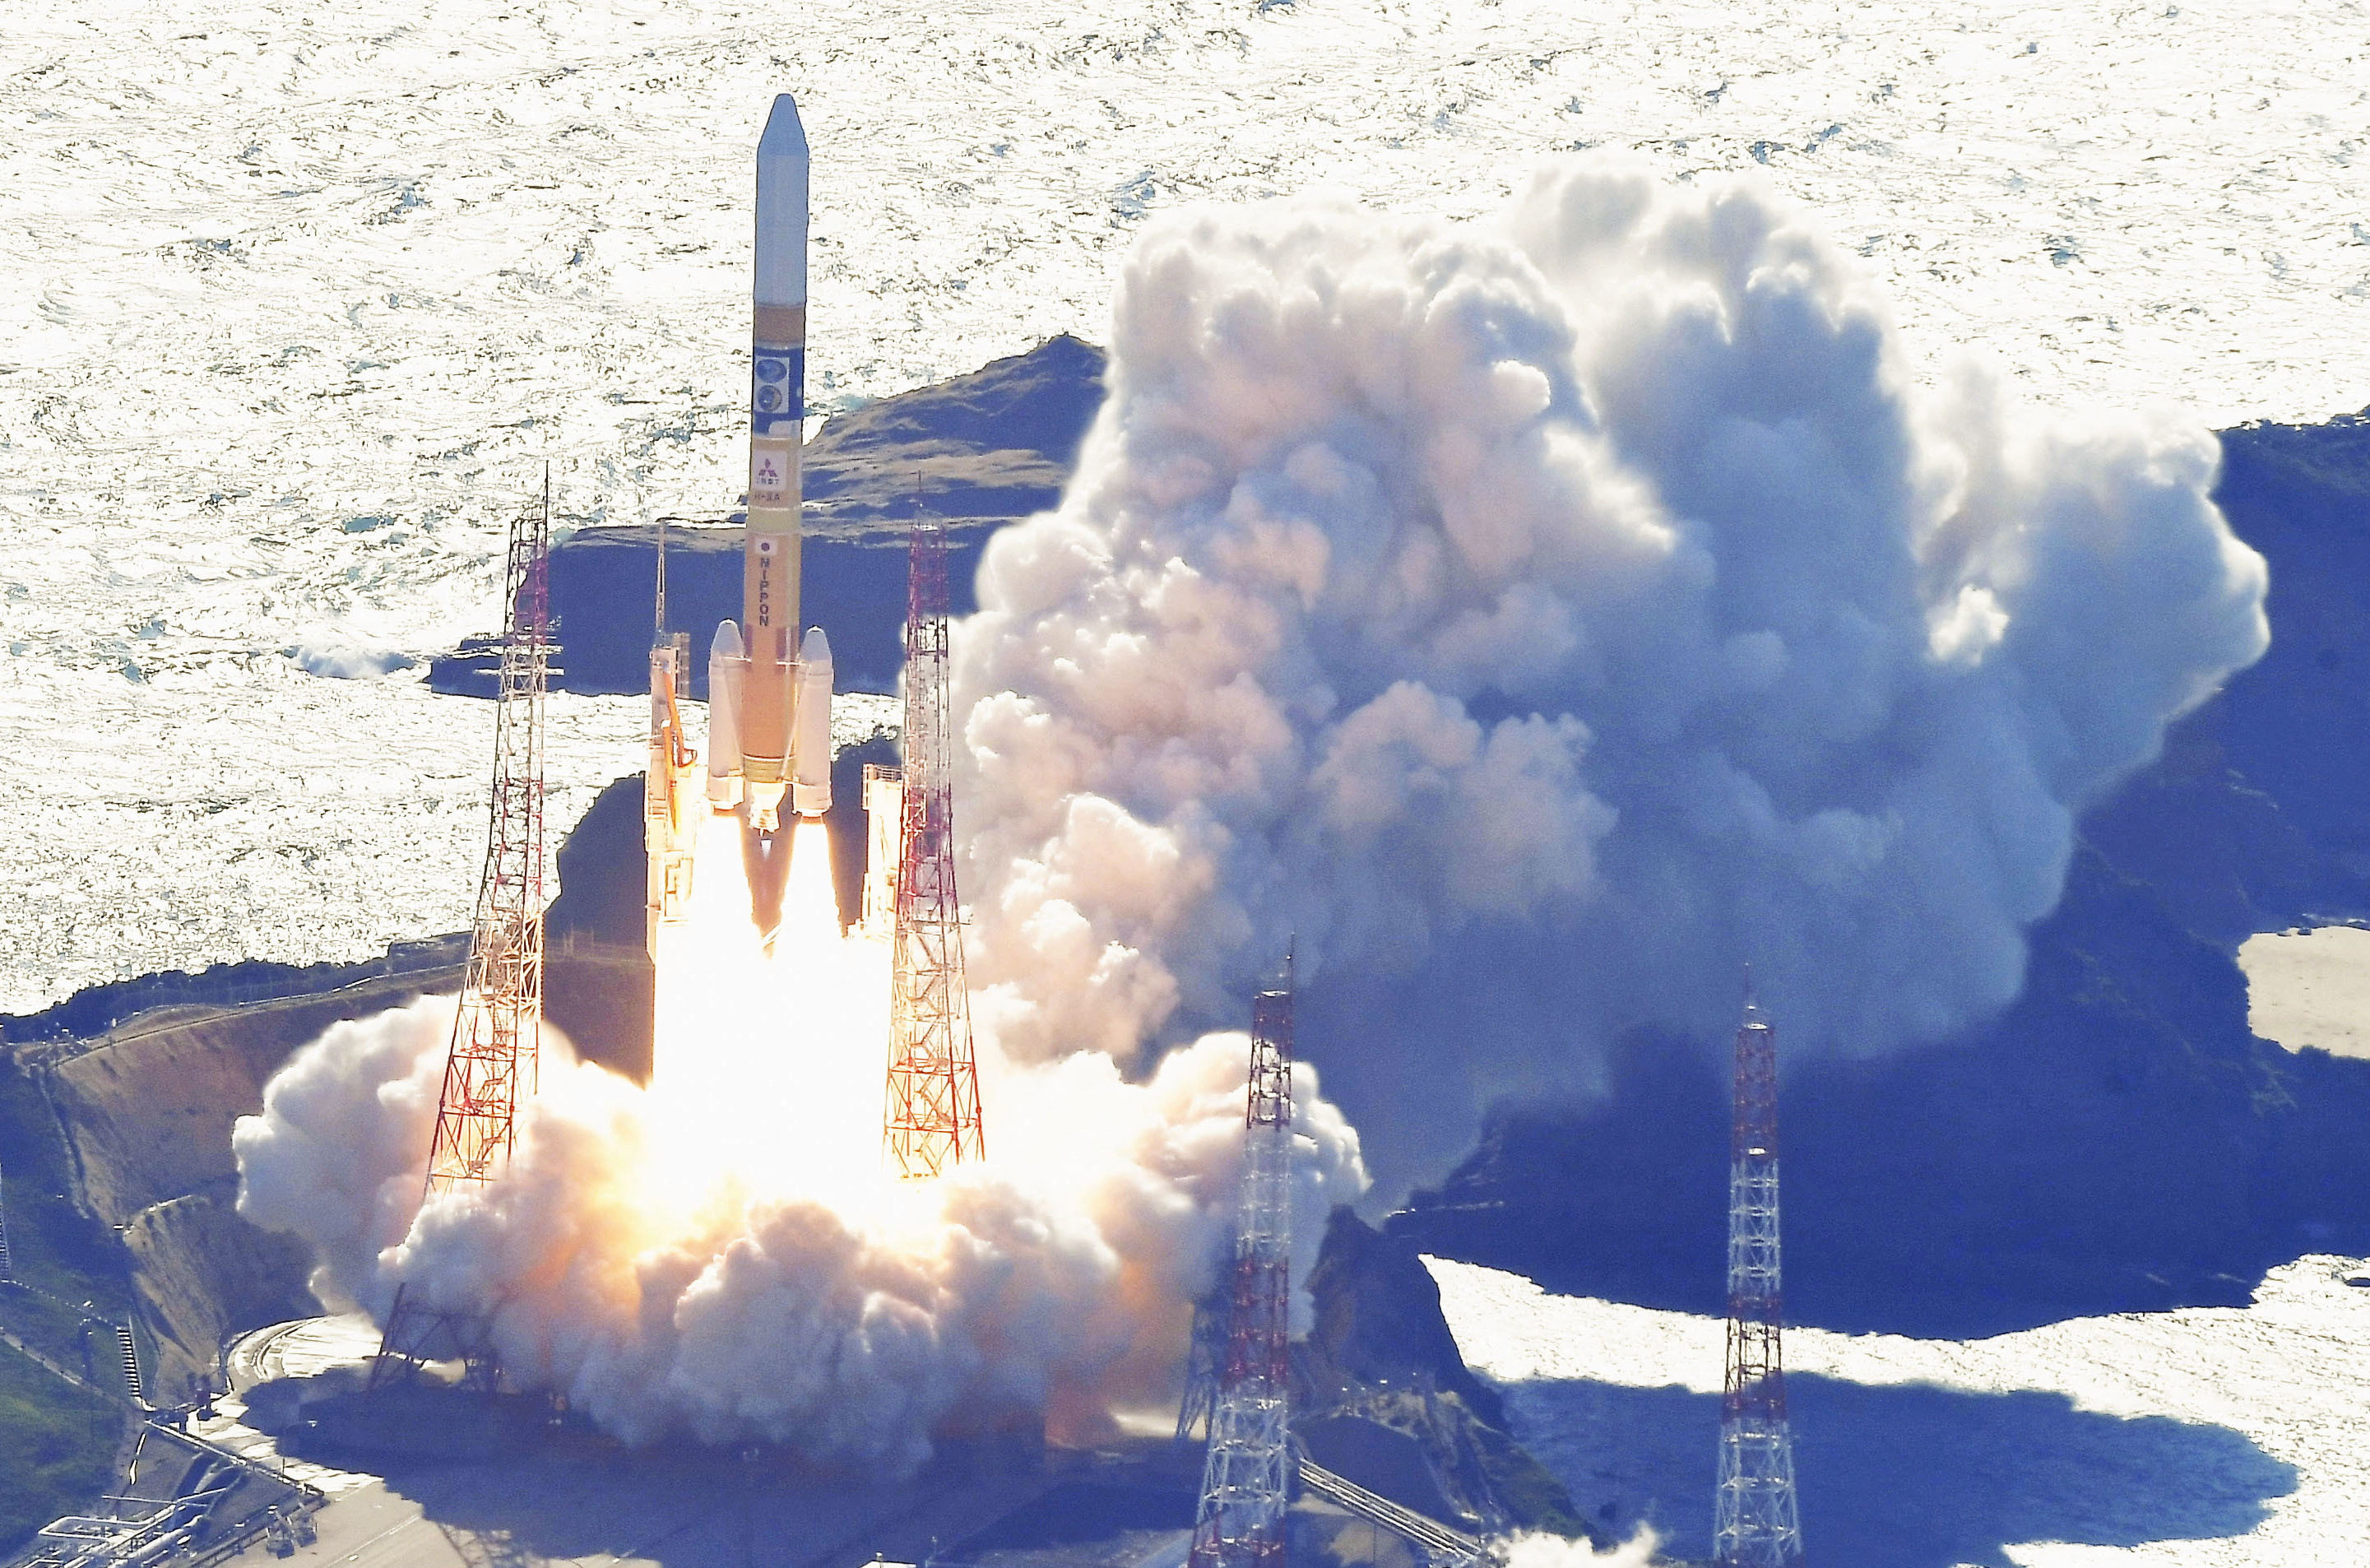 H-IIA rocket carrying the national space agency's moon lander is launched at Tanegashima Space Center on the southwestern island of Tanegashima